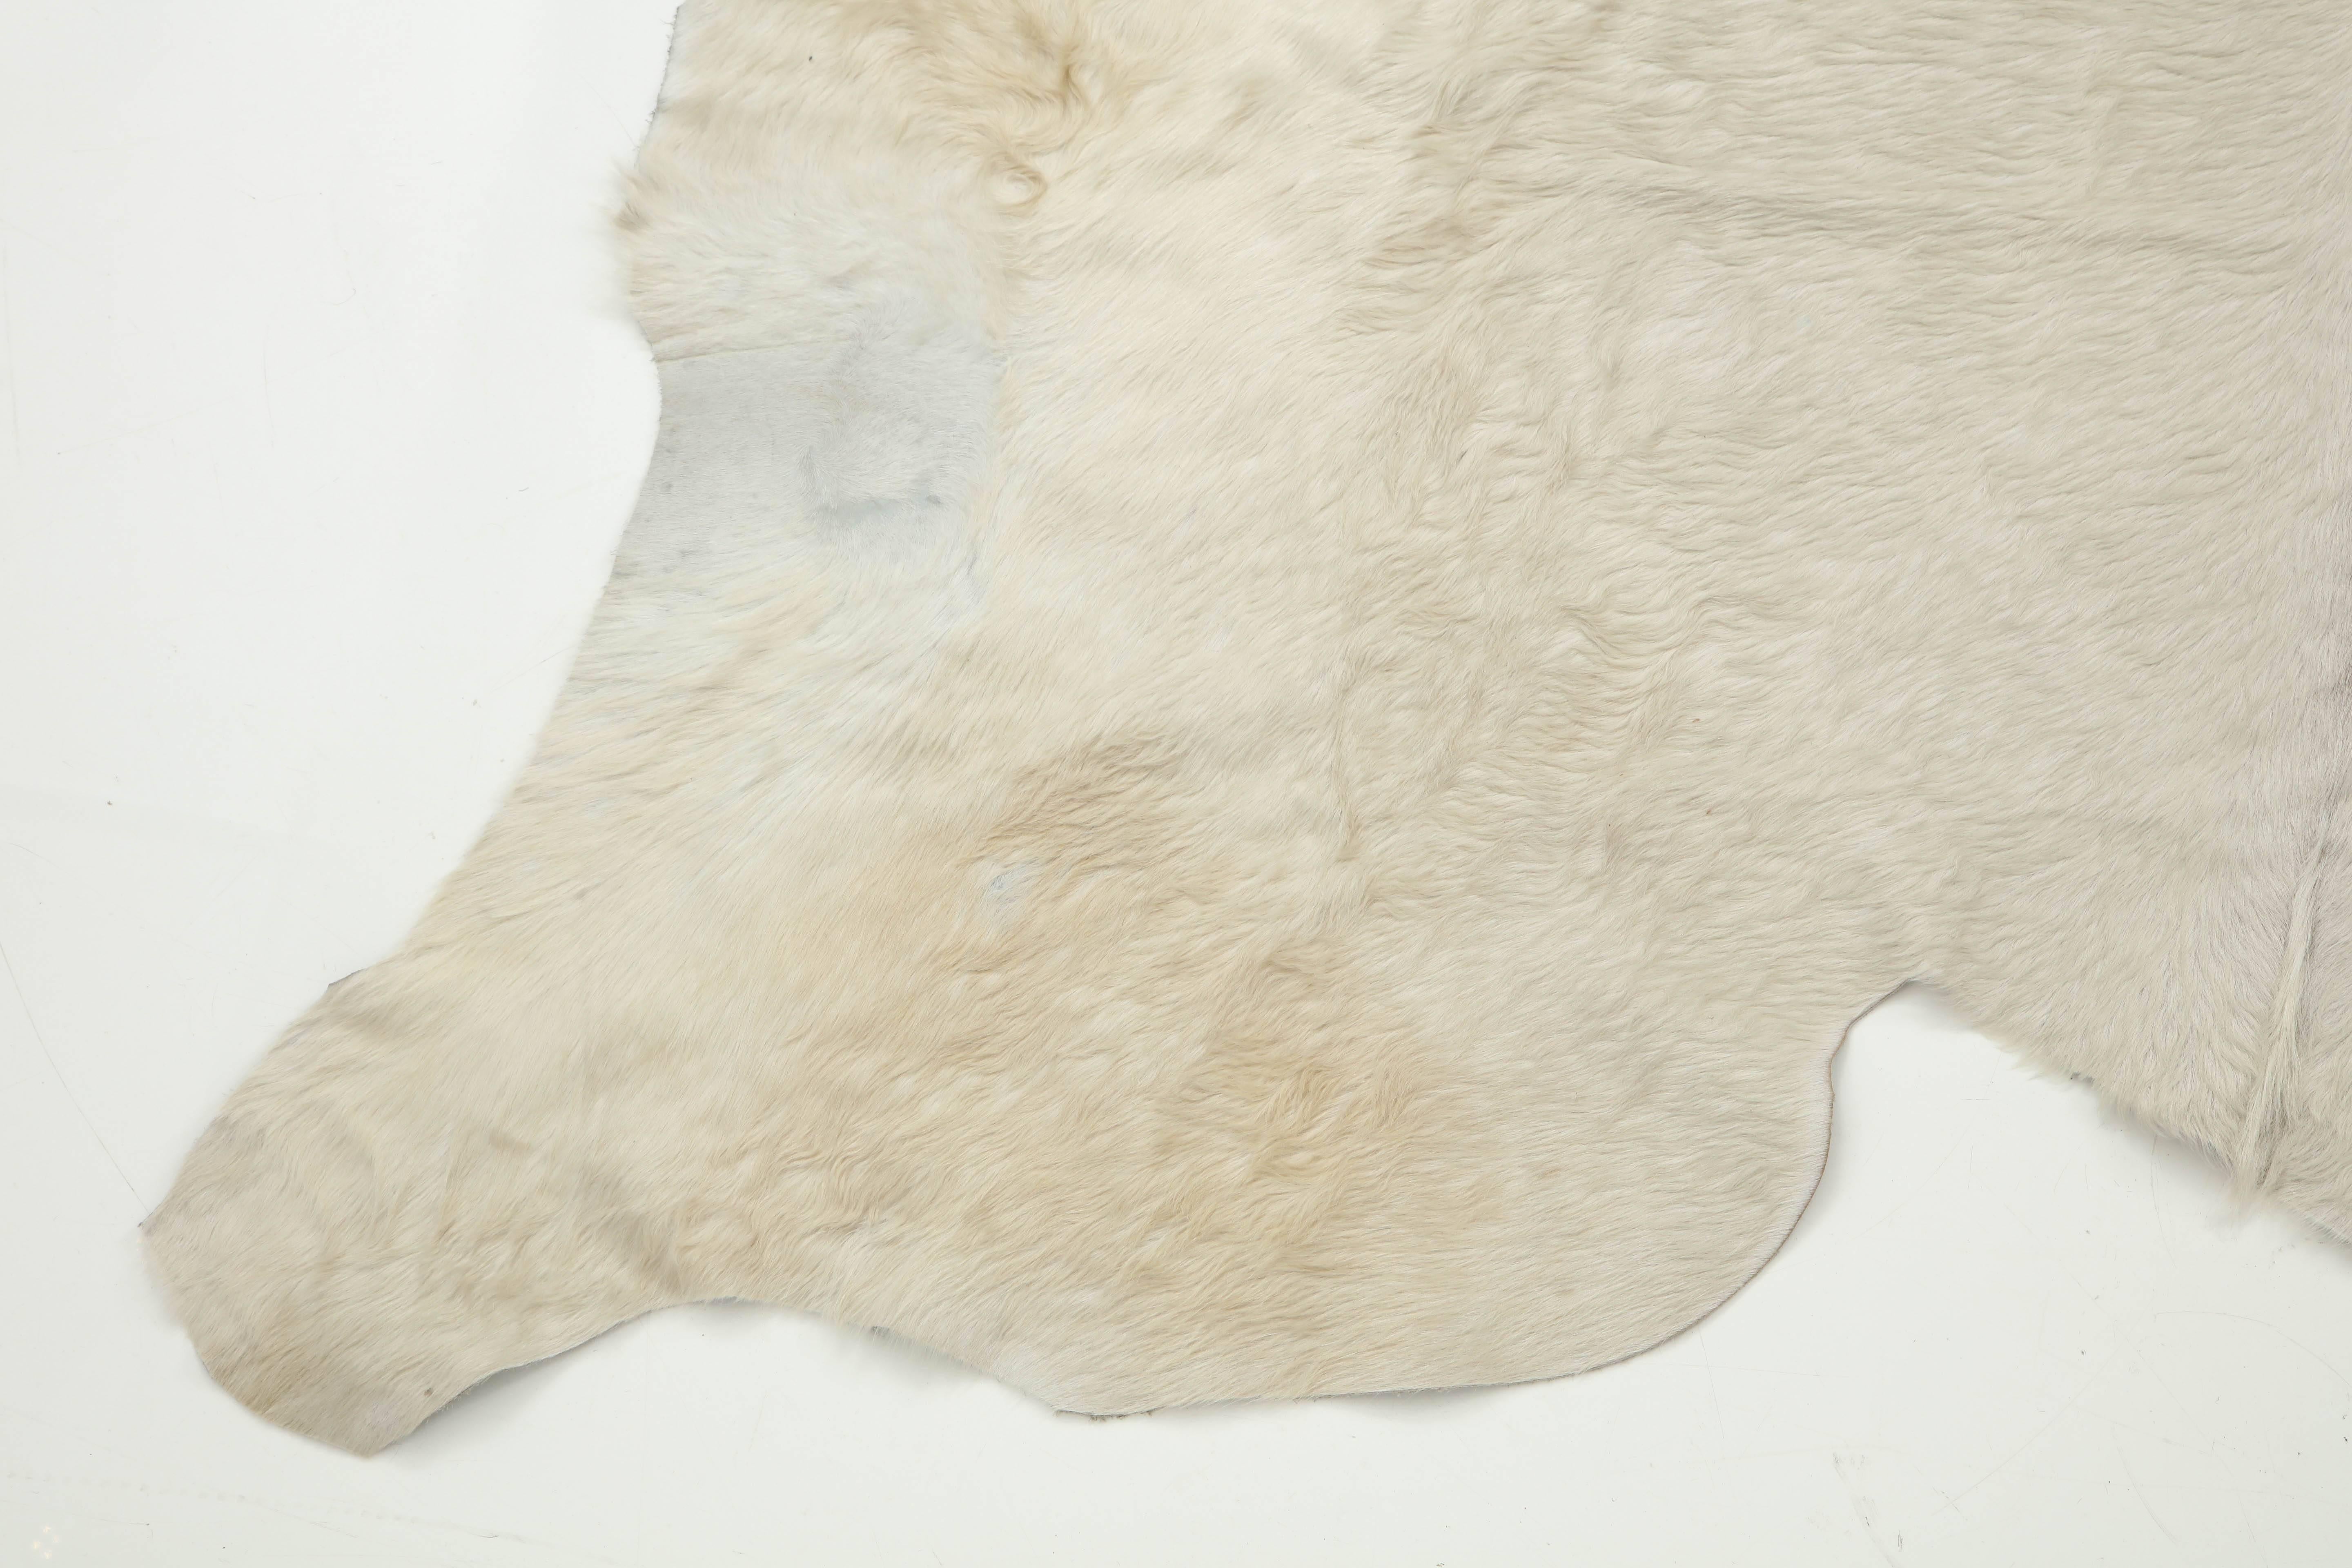 Decorative large white cow hide rug. Very durable.